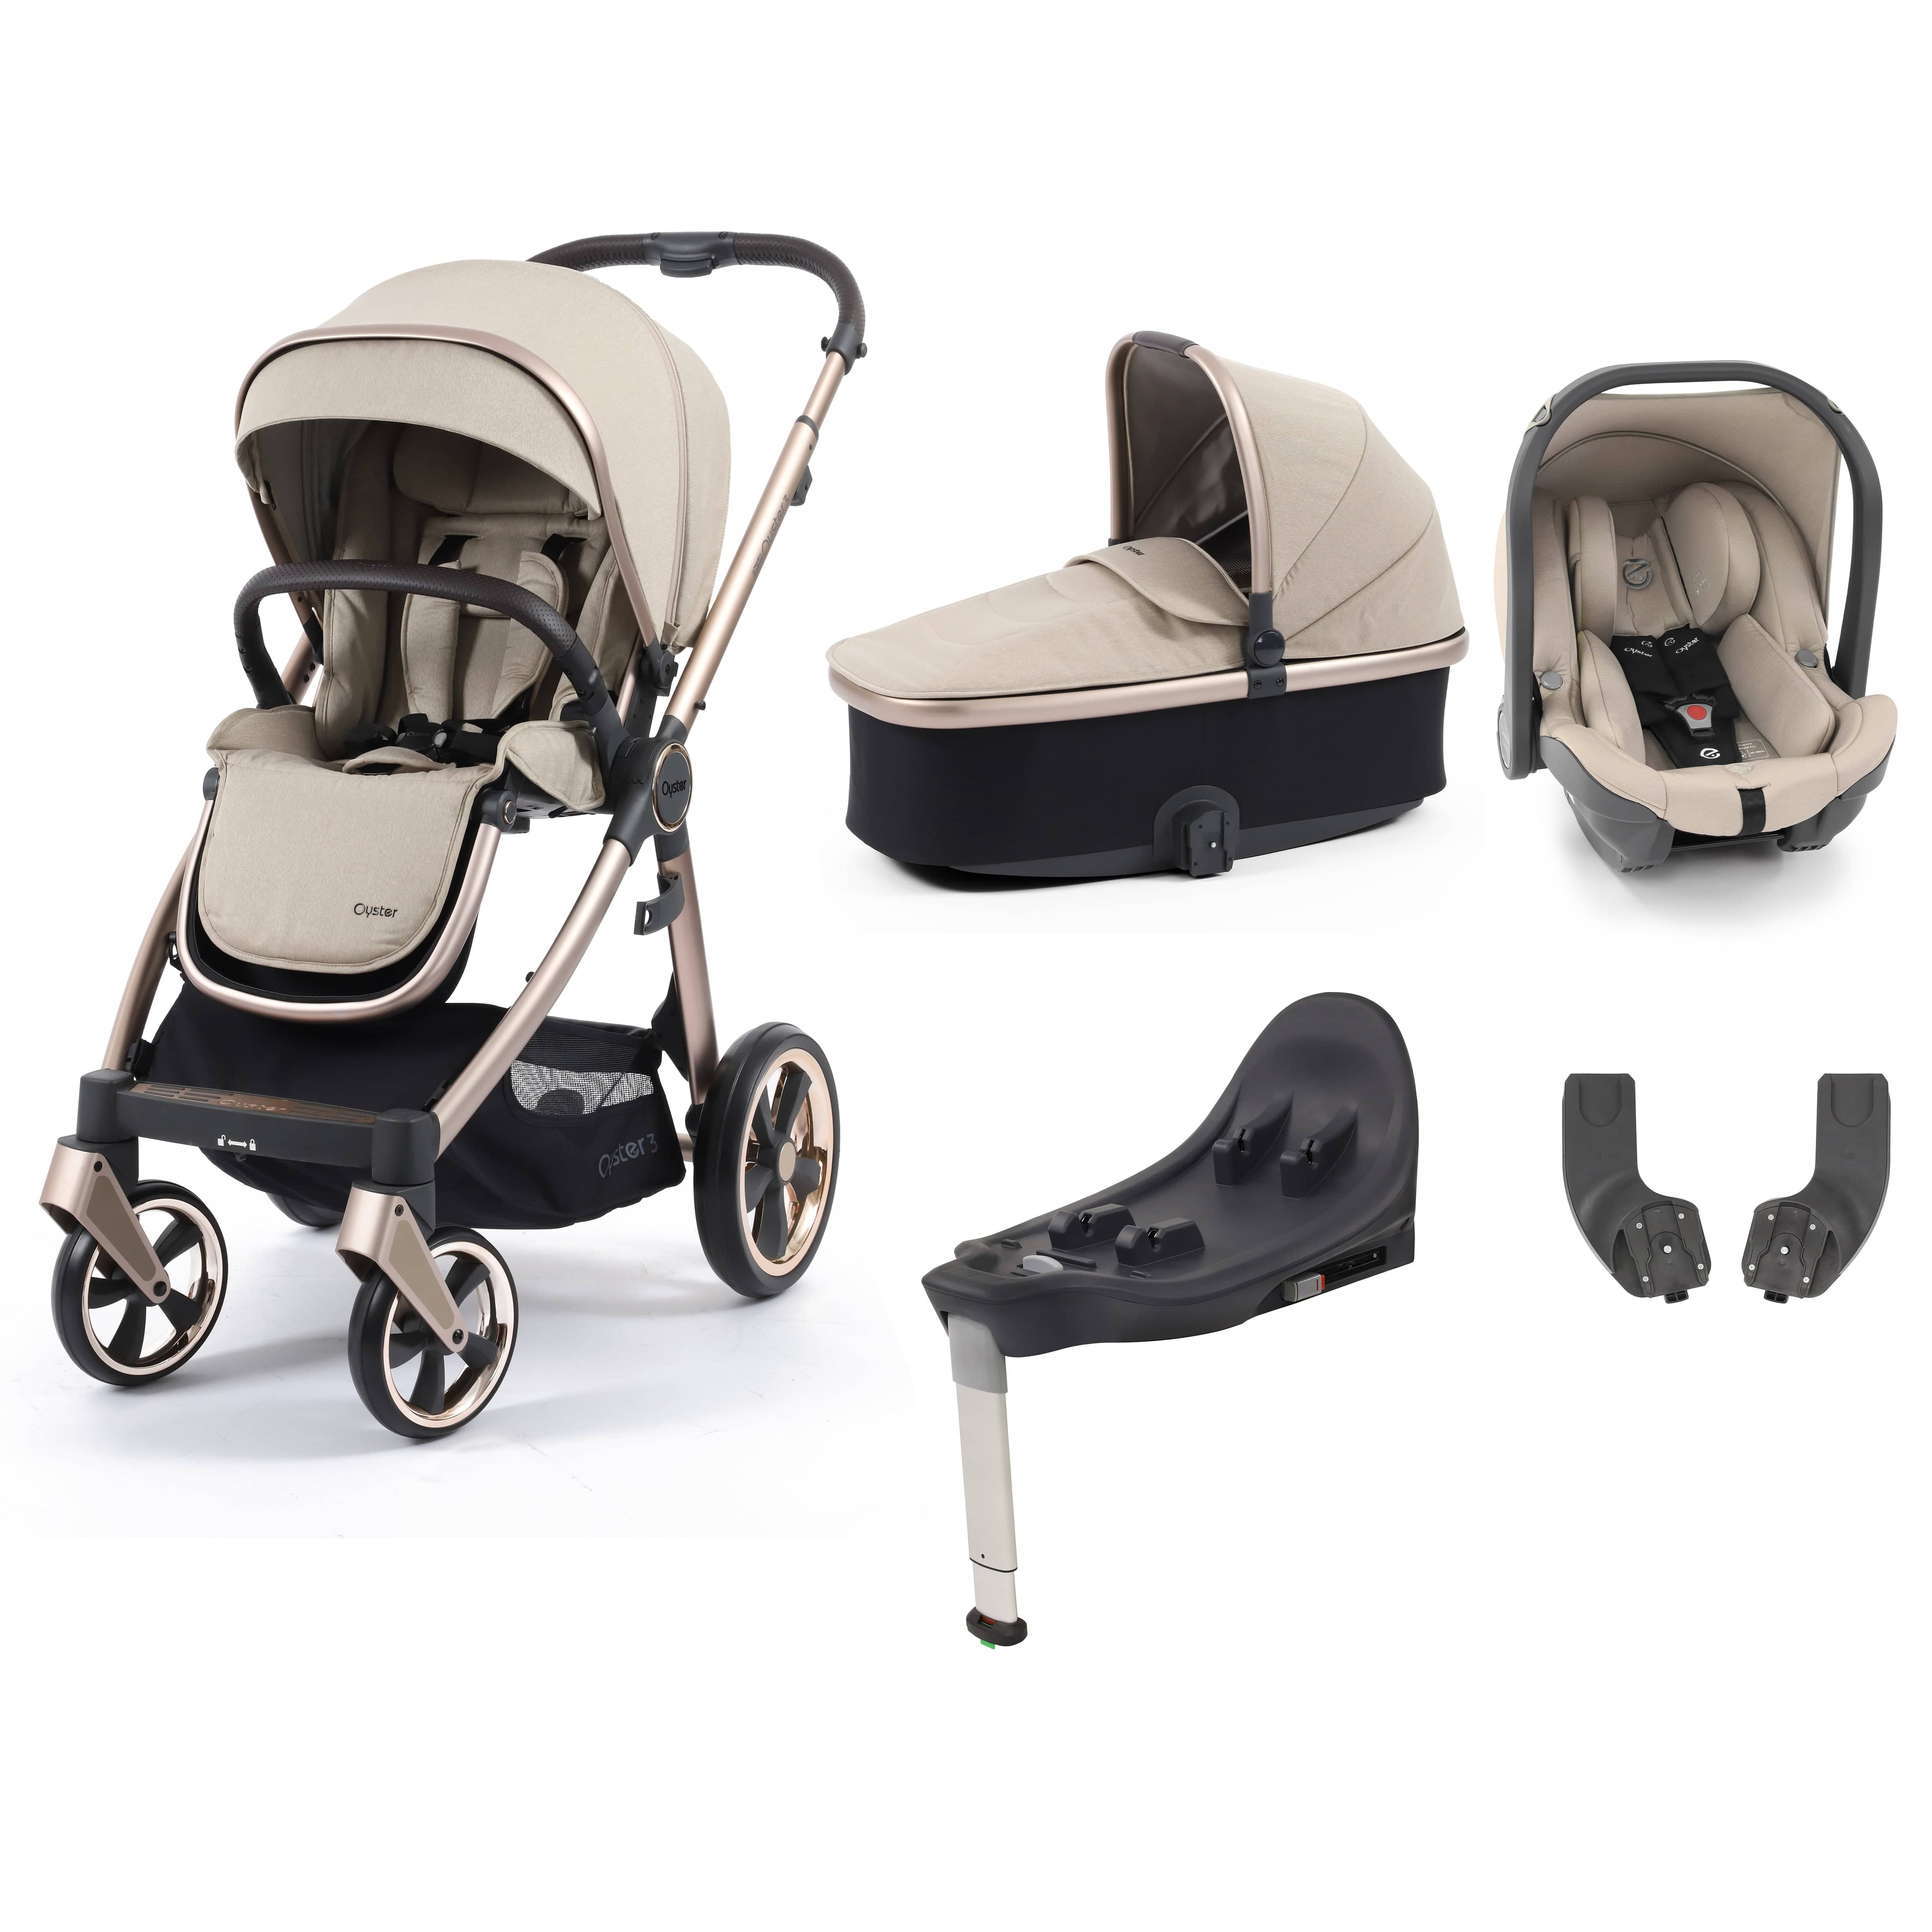 Babystyle Oyster 3 Essential Bundle with Car Seat in Creme Brulee Travel Systems 14736-CMB 5060711567235